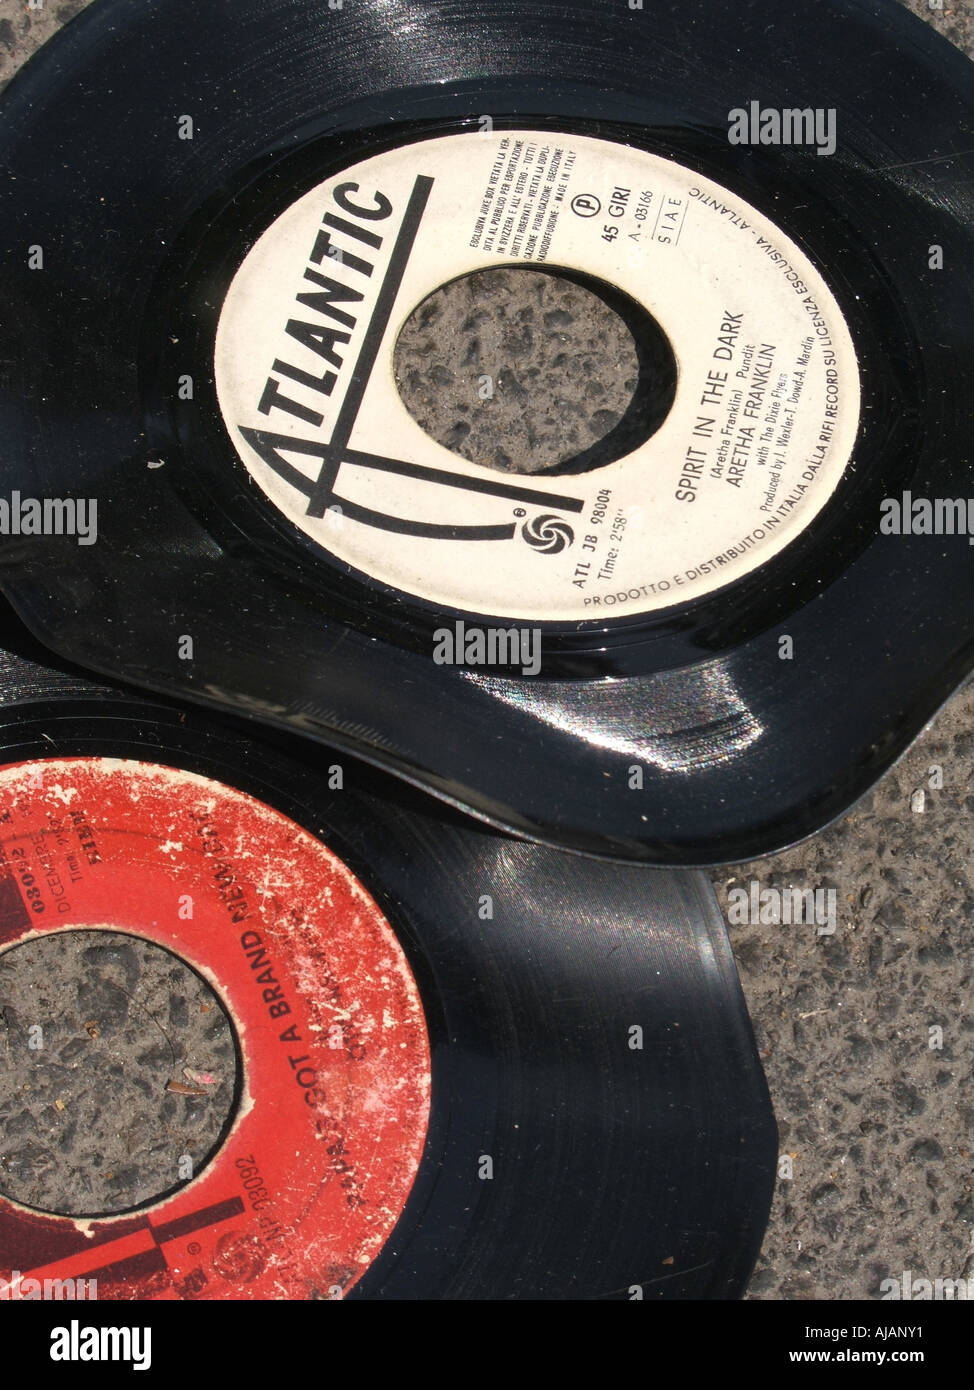 two old vinyl music records Stock Photo